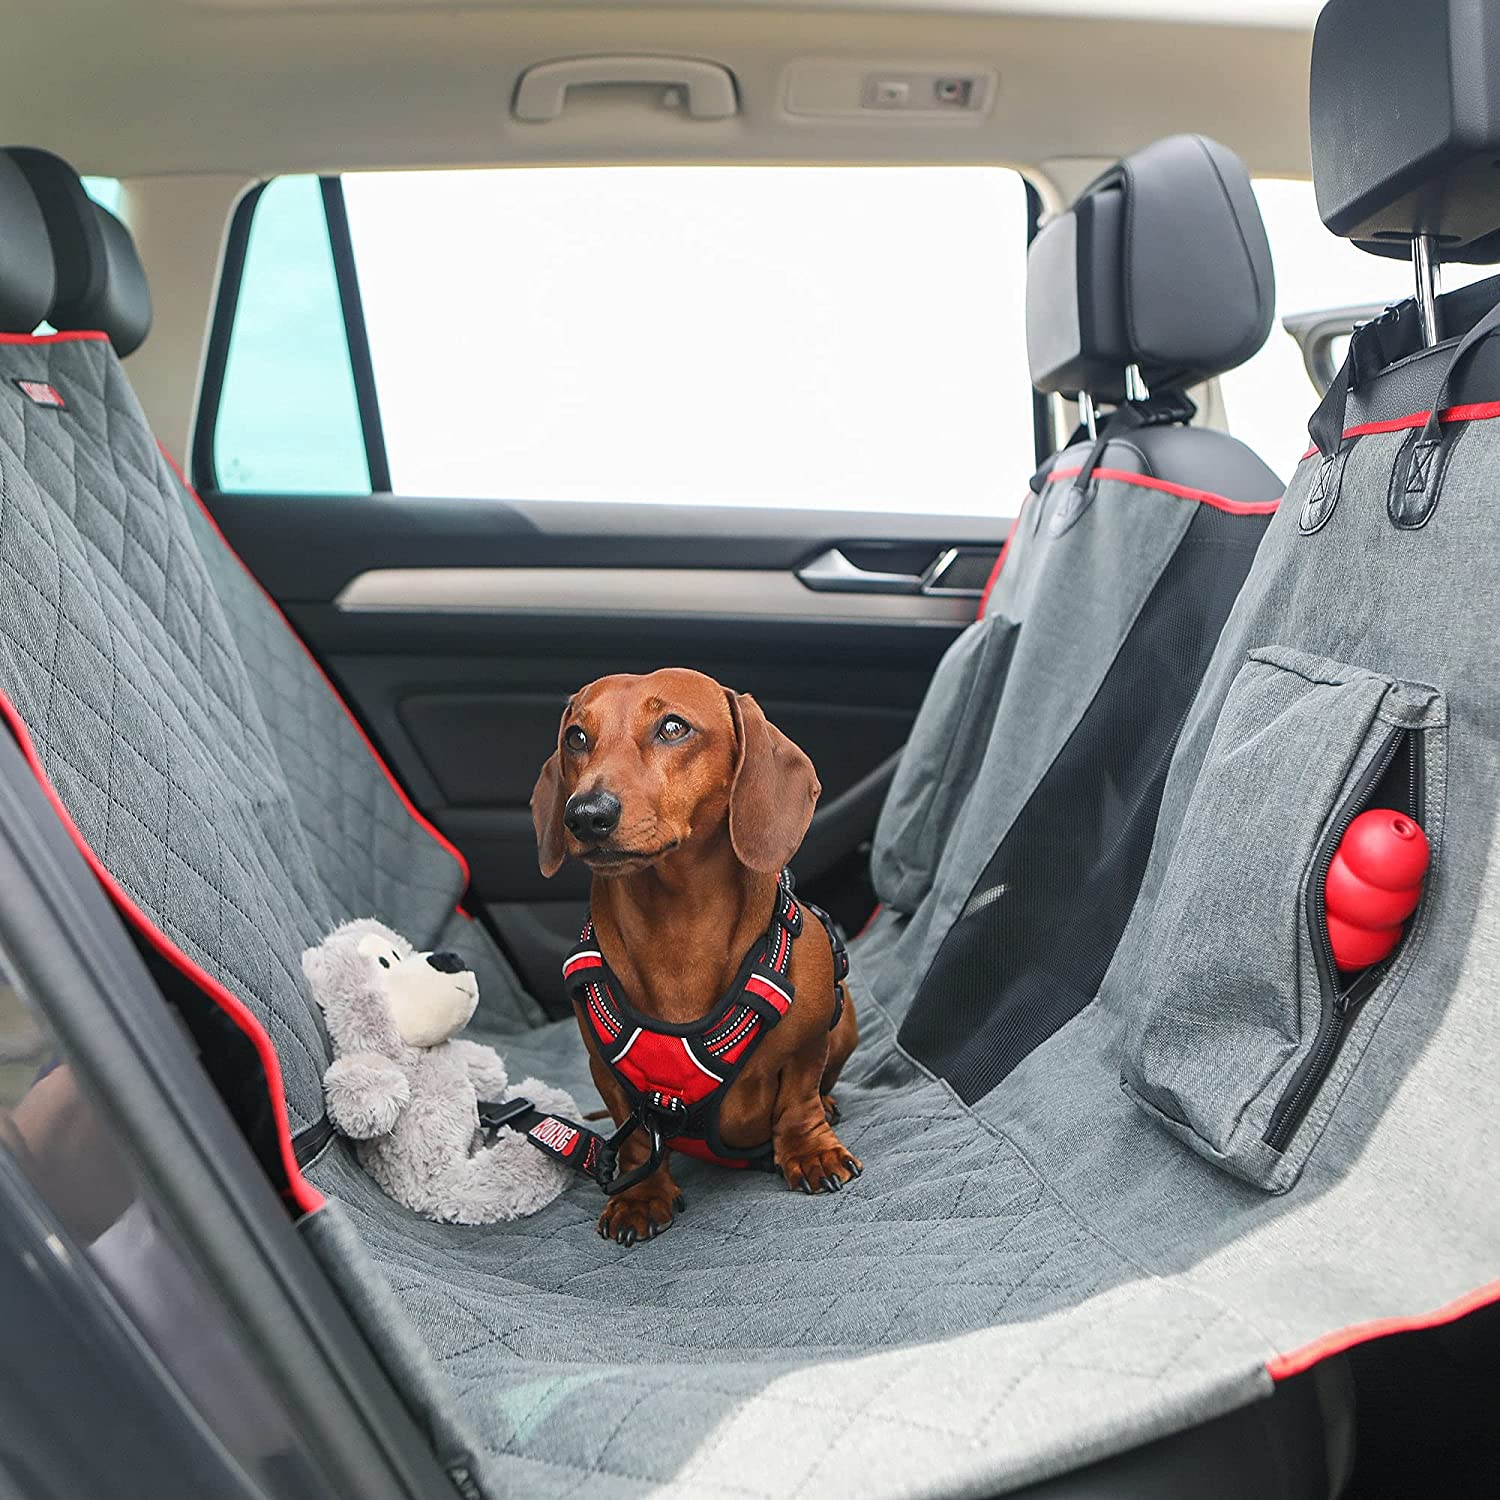 dachschund wearing a read harness on a gray seat cover in car